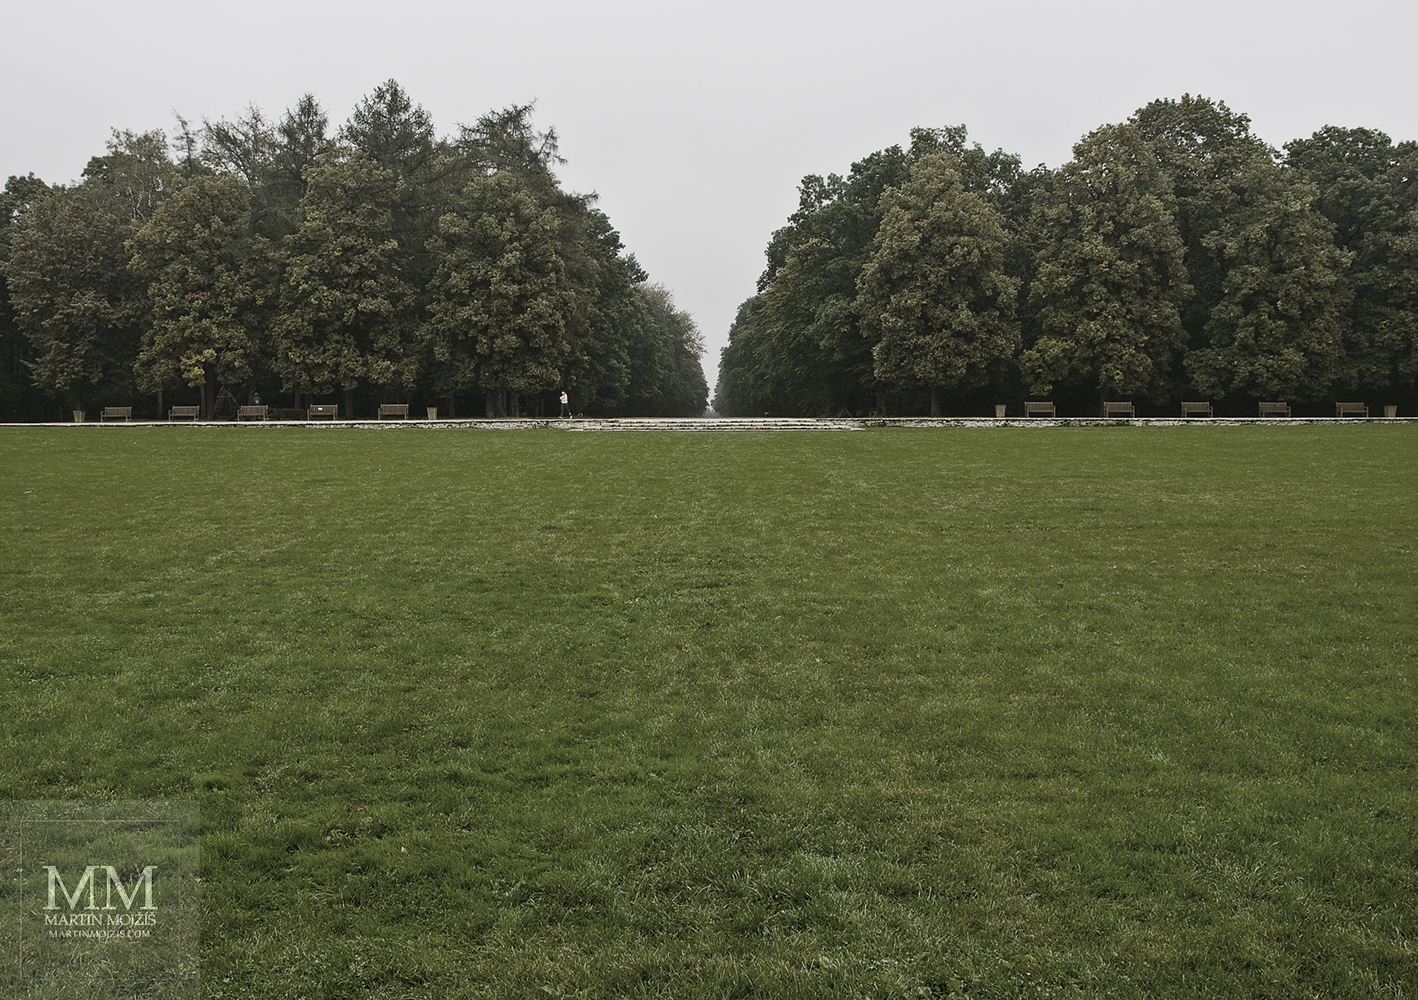 City park, grassy meadow, trees in the background. Fine Art photograph of Martin Mojzis with the title SILENT MORNING IN A CITY PARK.